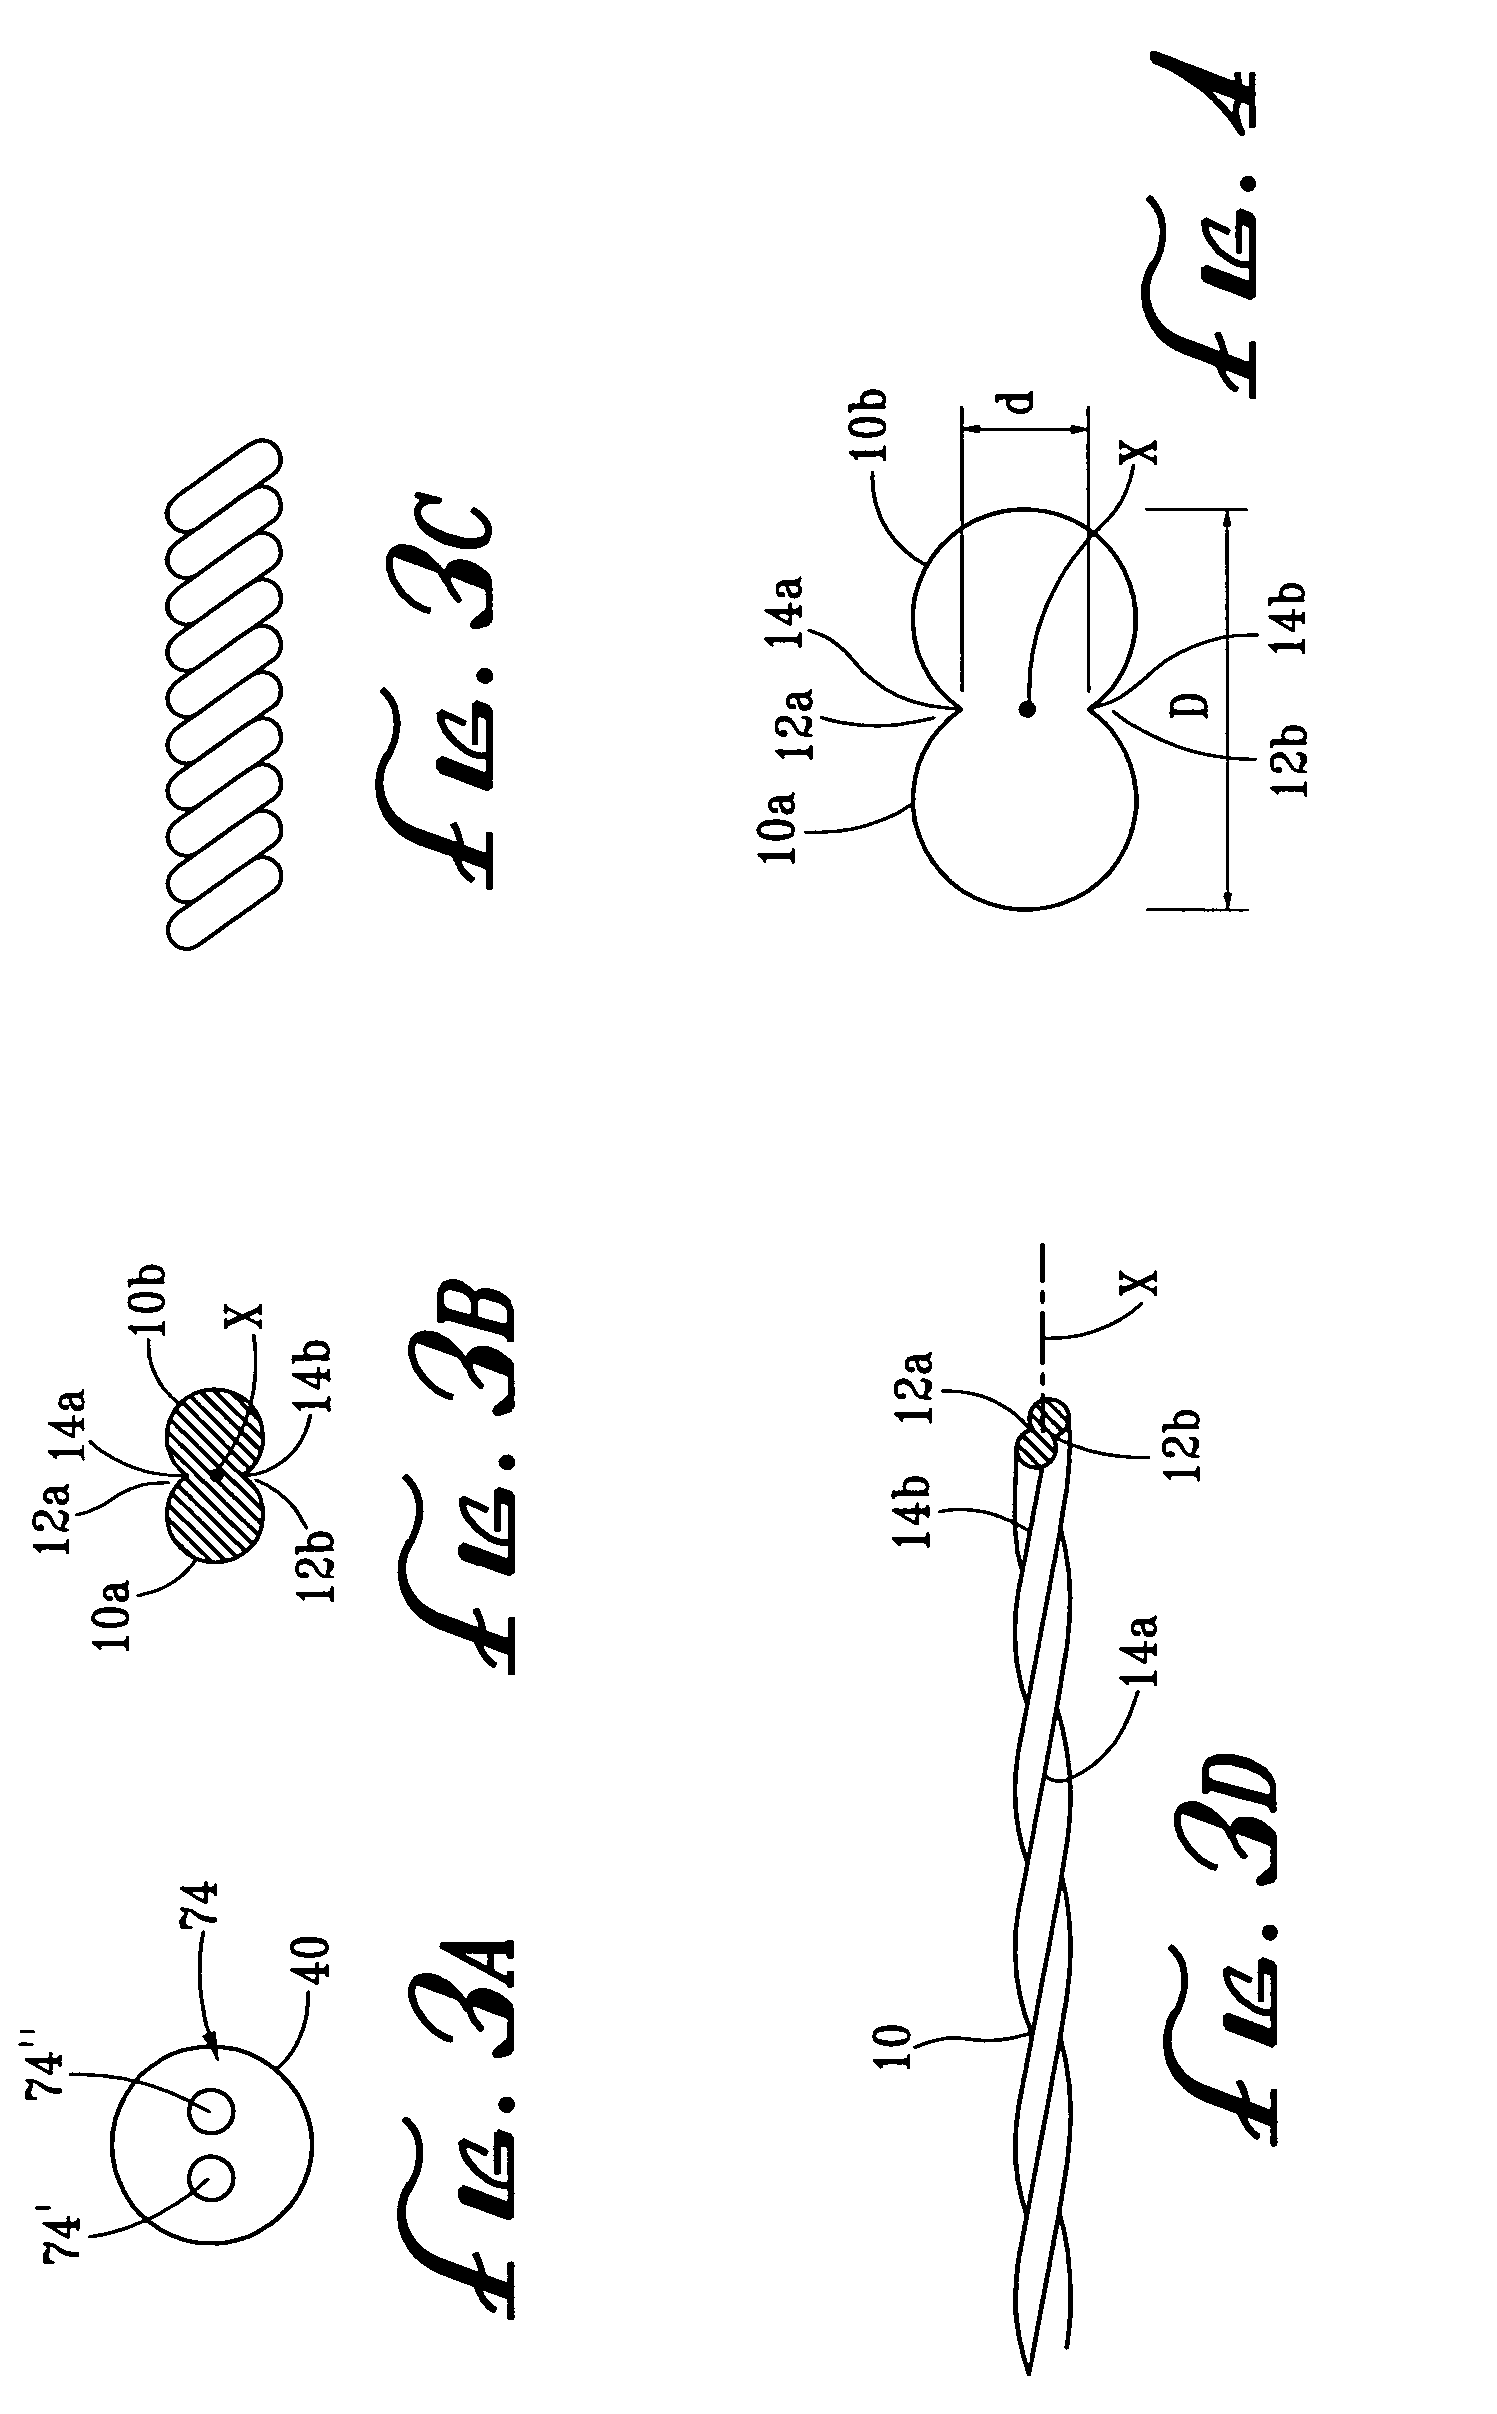 Assembly for use in continuously forming one or more lengths of noise attenuating flexible cutting line for use in rotary vegetation trimmers